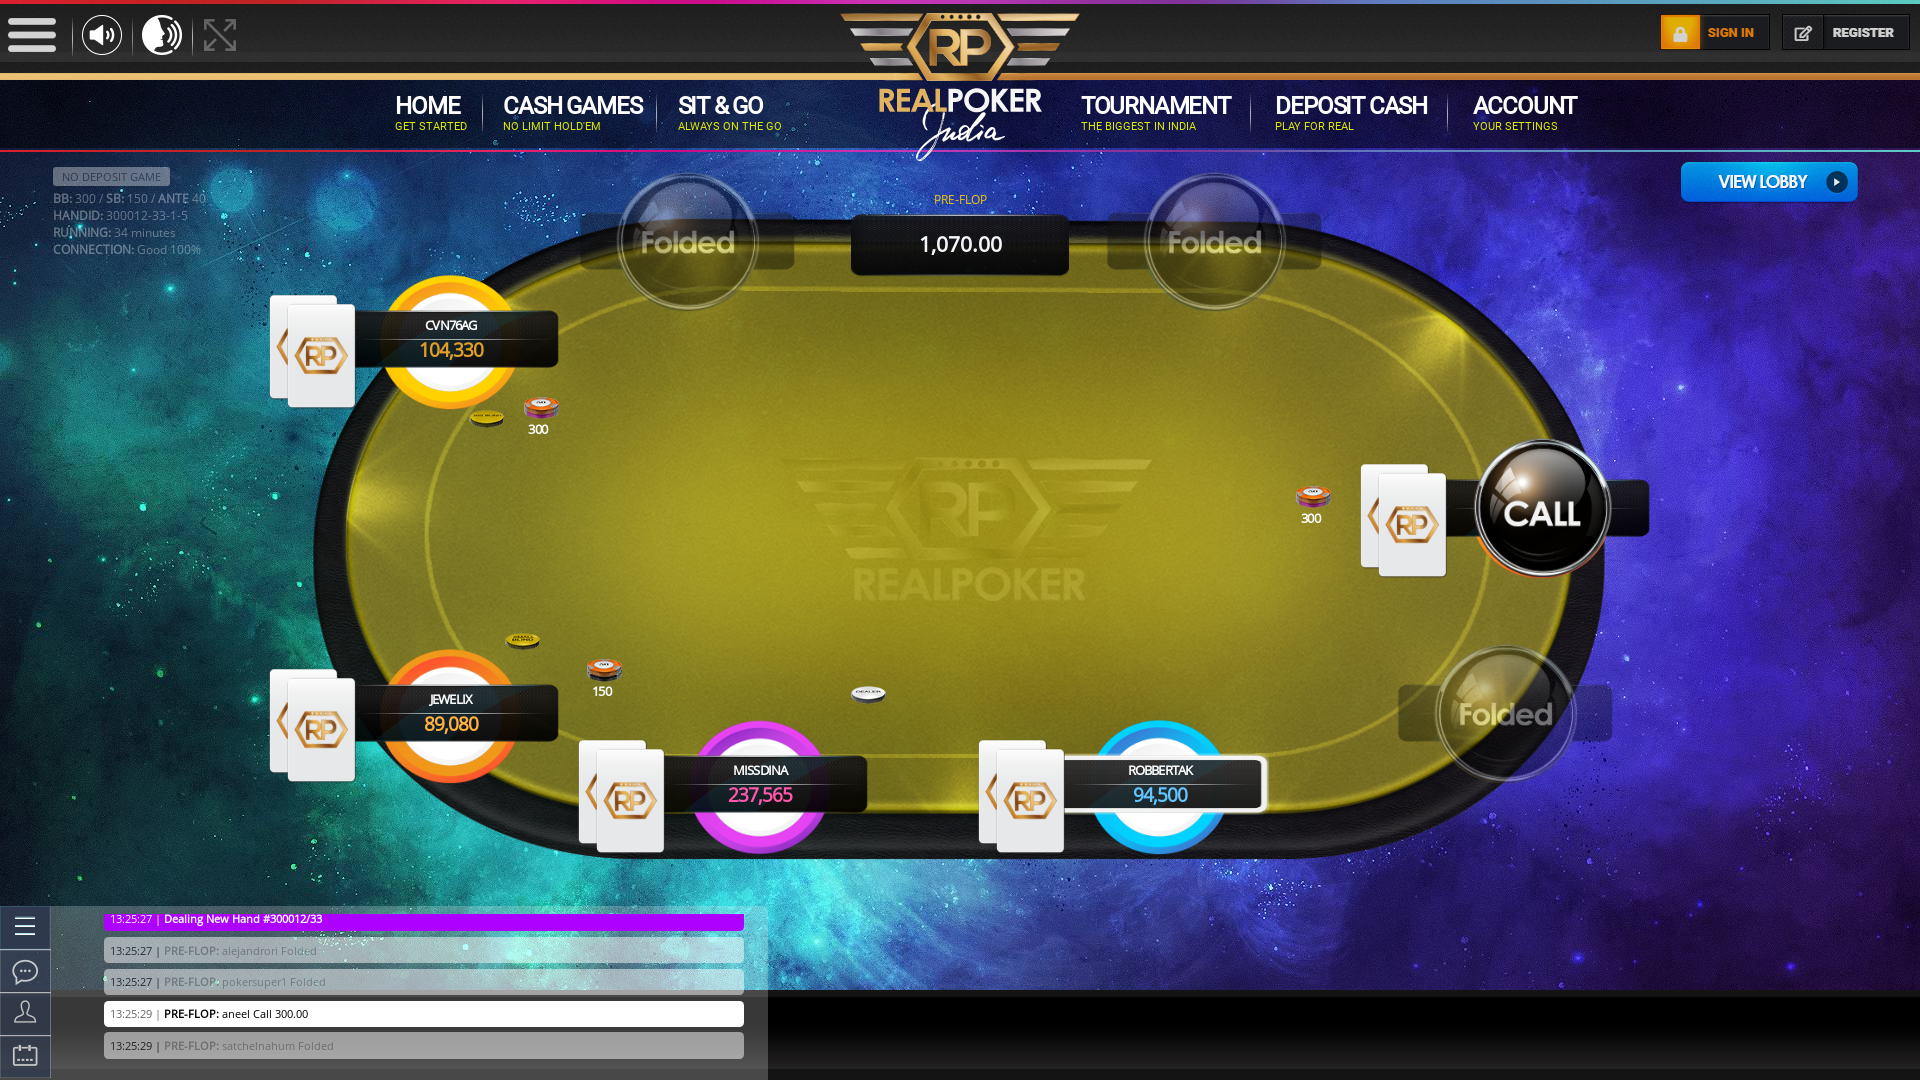 10 player texas holdem table at real poker with the table id 300012